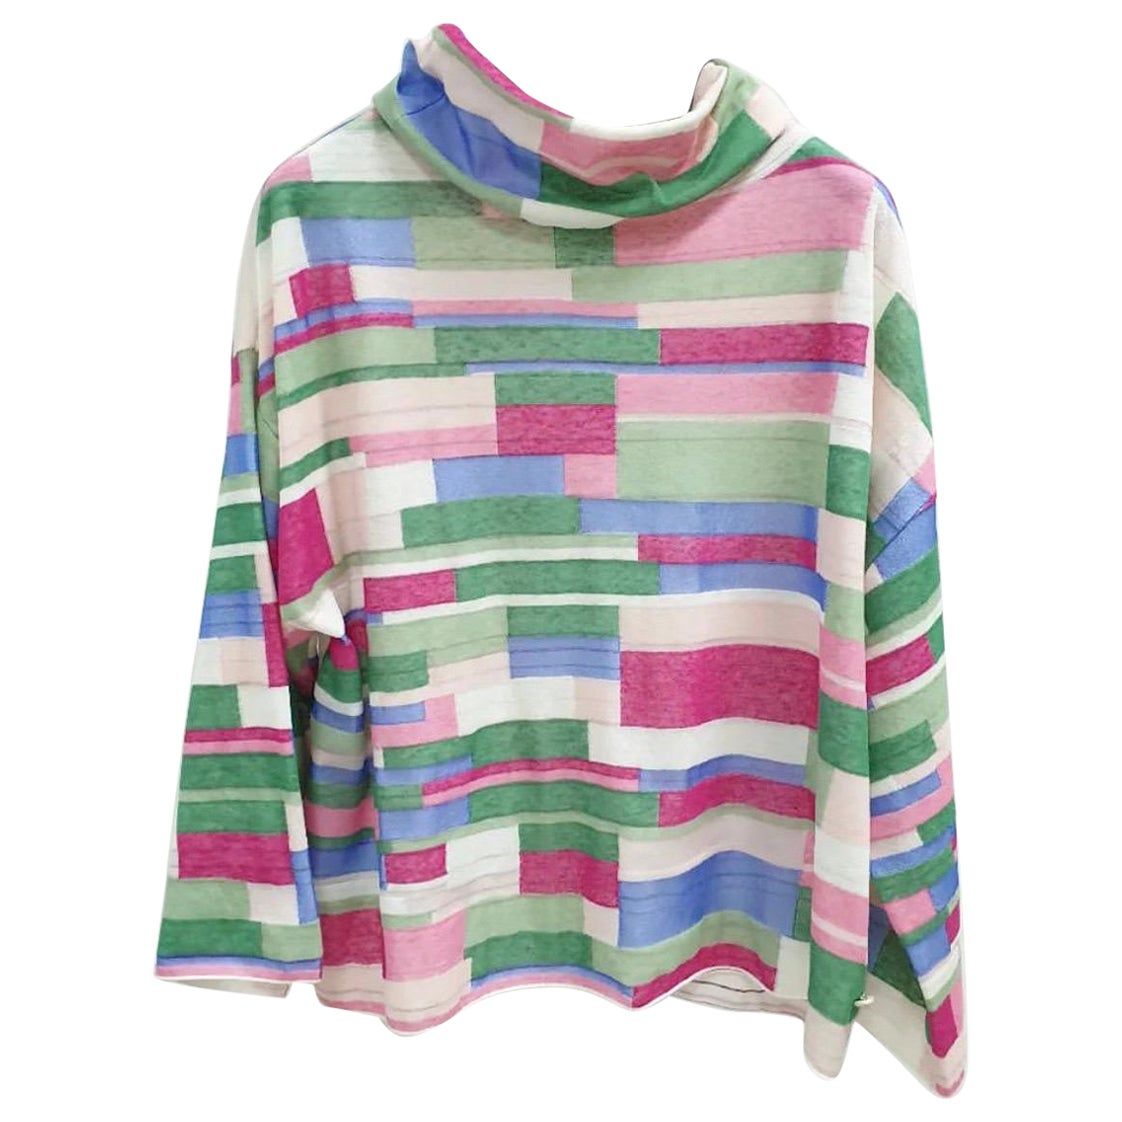 Chanel Multicolor Abstract Printed Knit Turtleneck Top